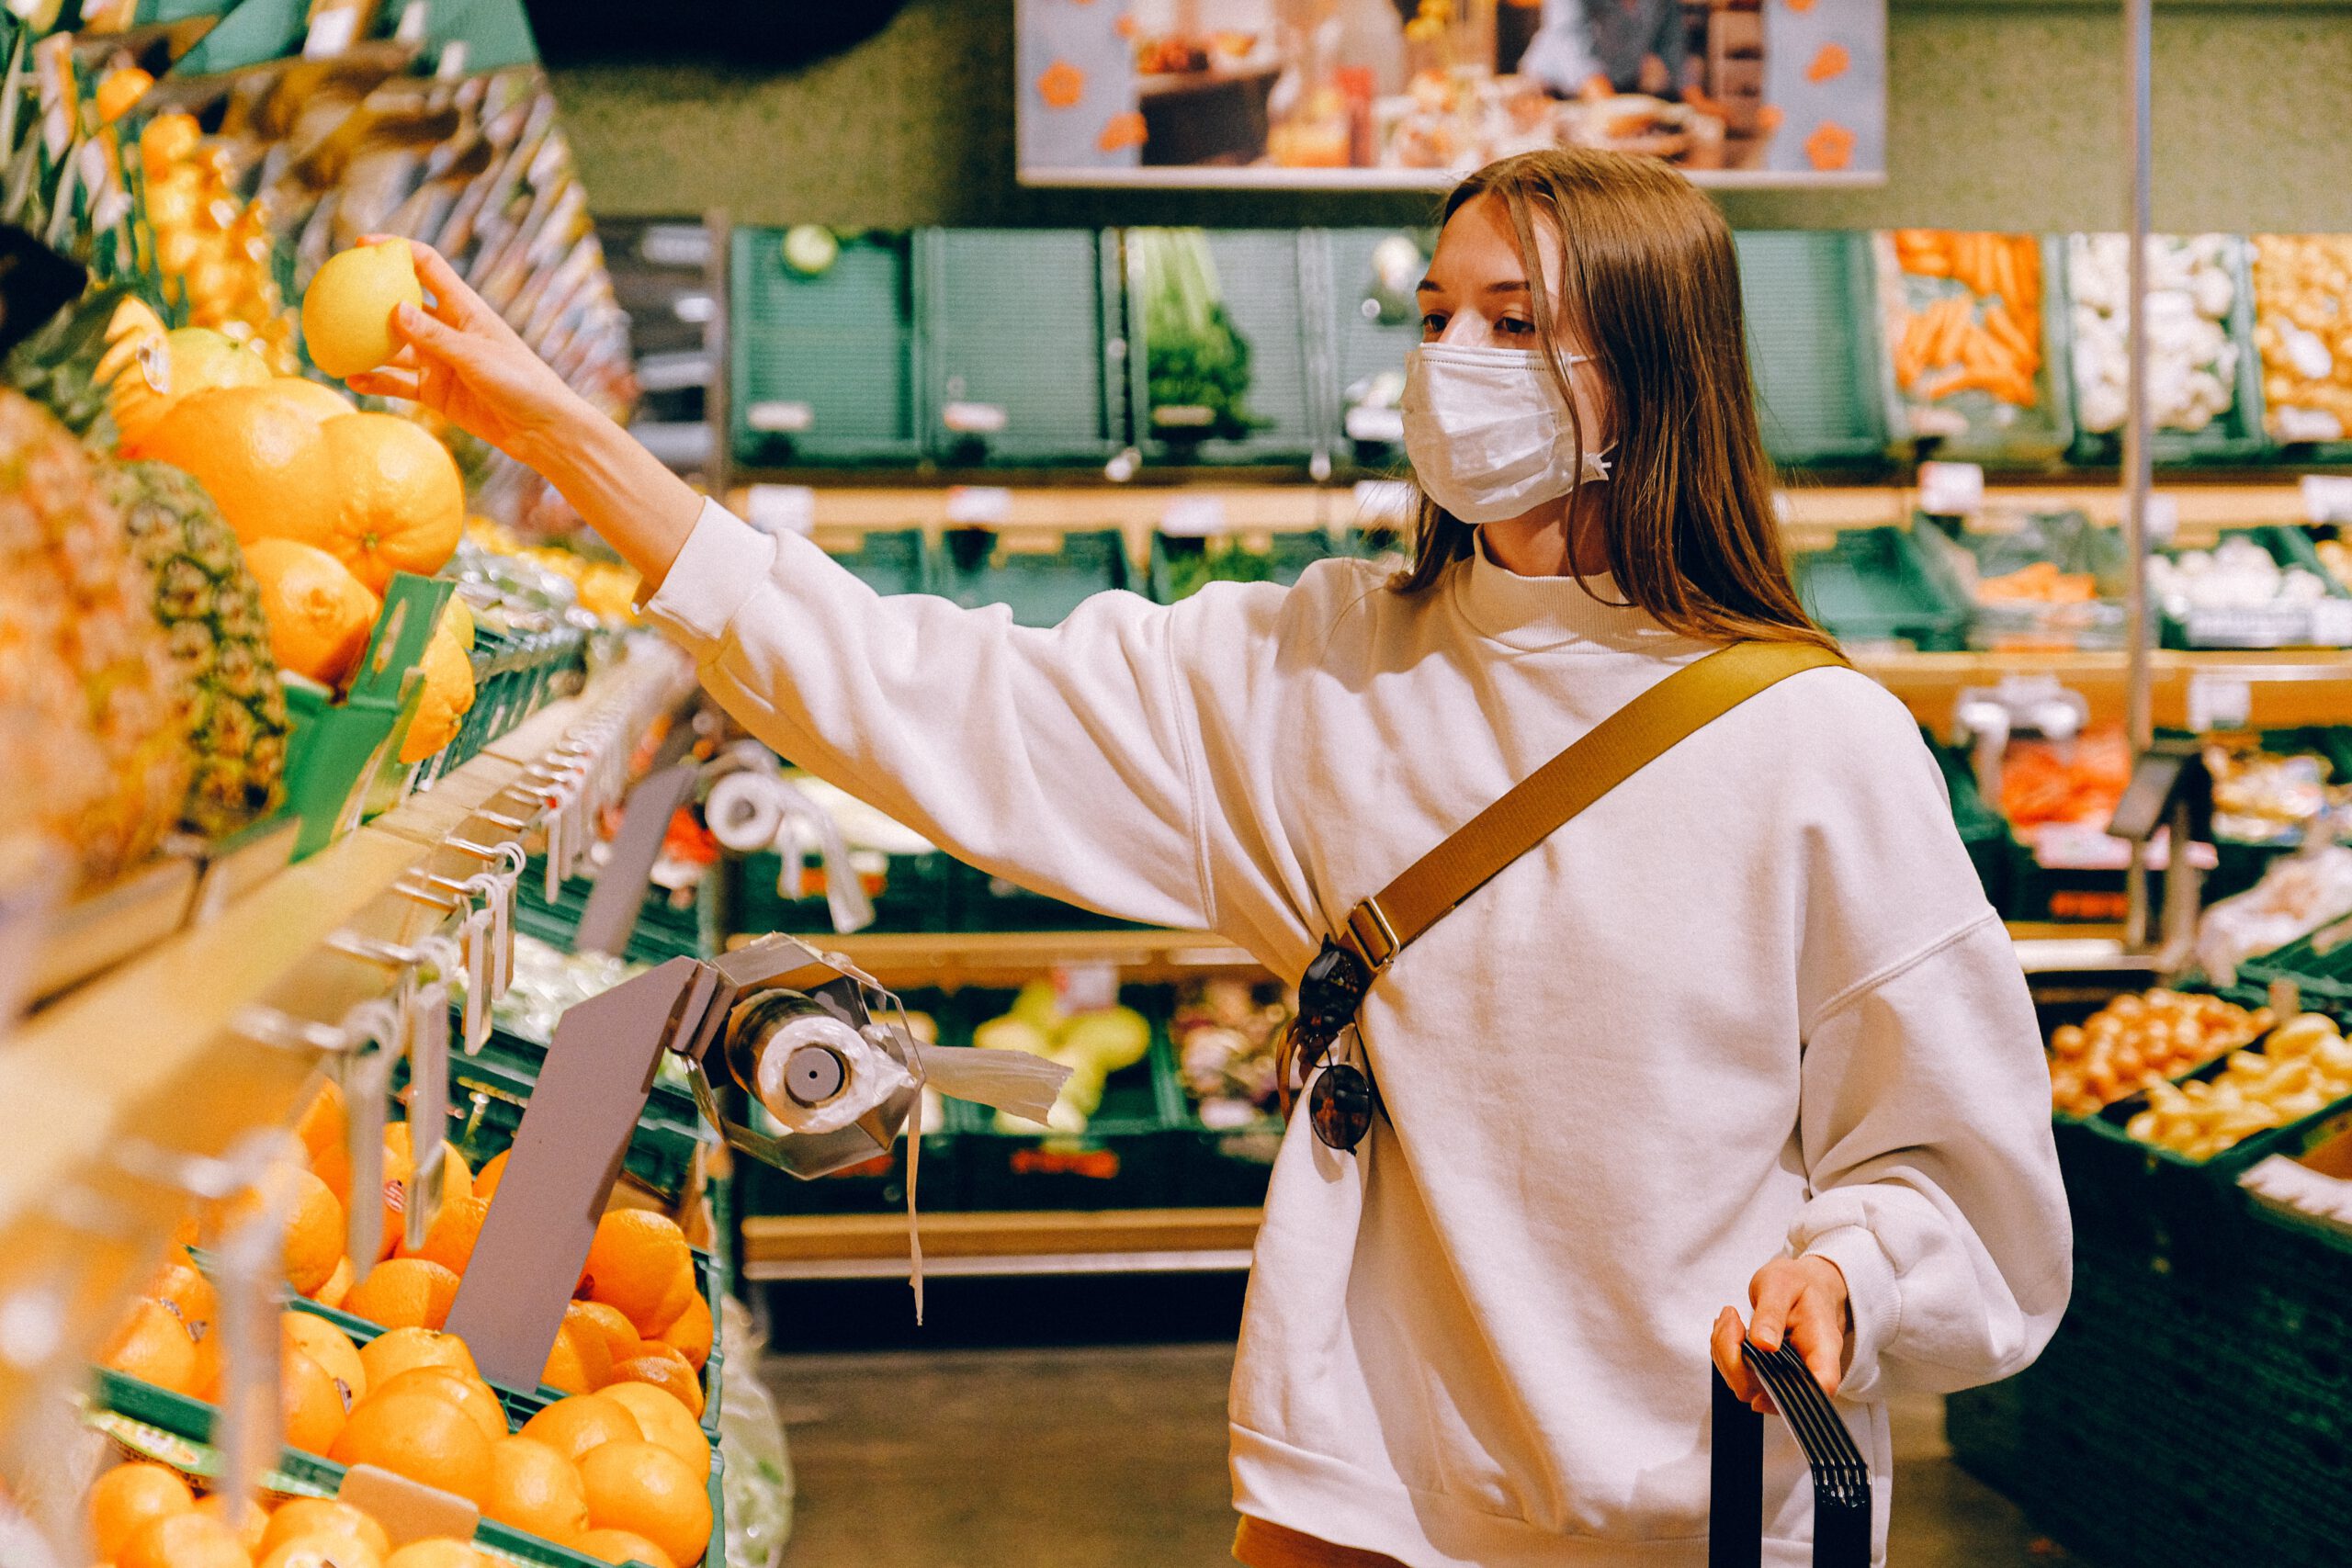 Q&A: Health and safety will continue to drive grocery retail trends in 2021